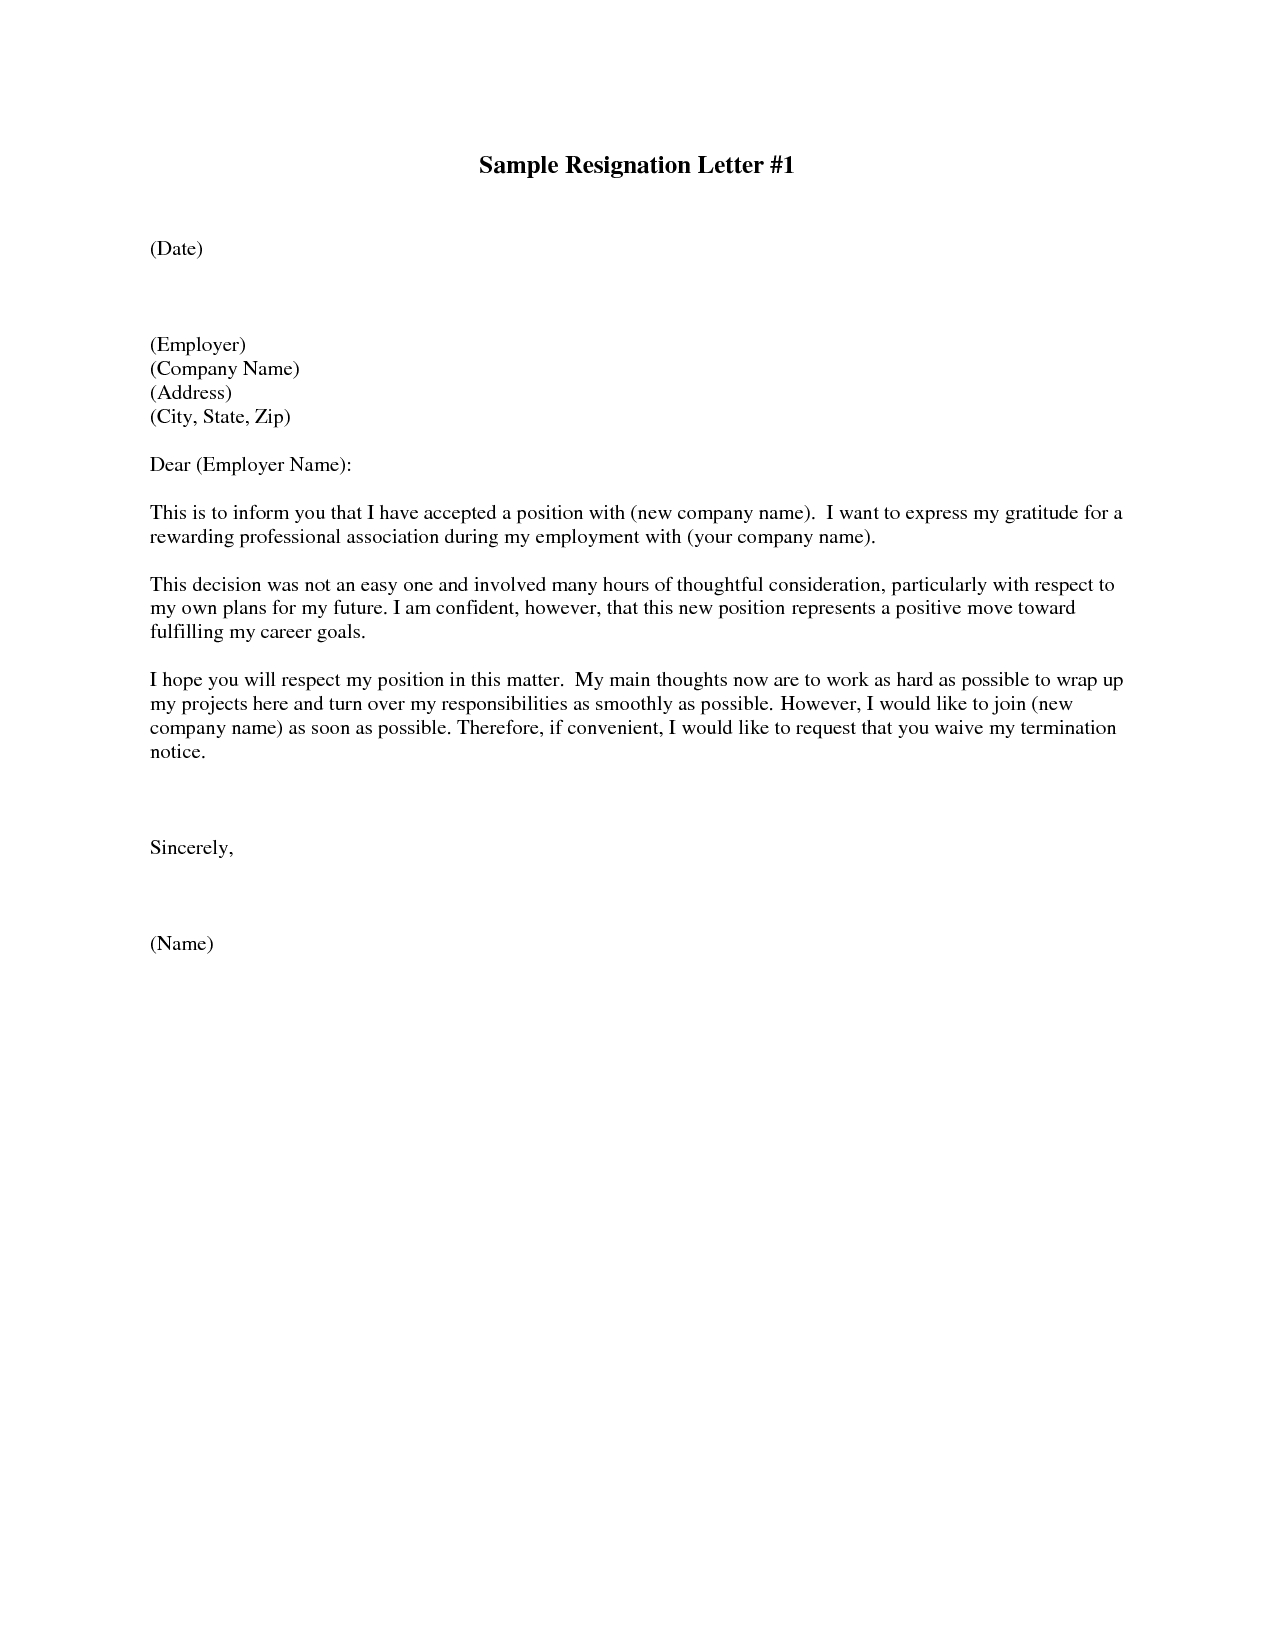 Resignation Letter format Template - Resignation Letter Sample Image Store Things to Wear